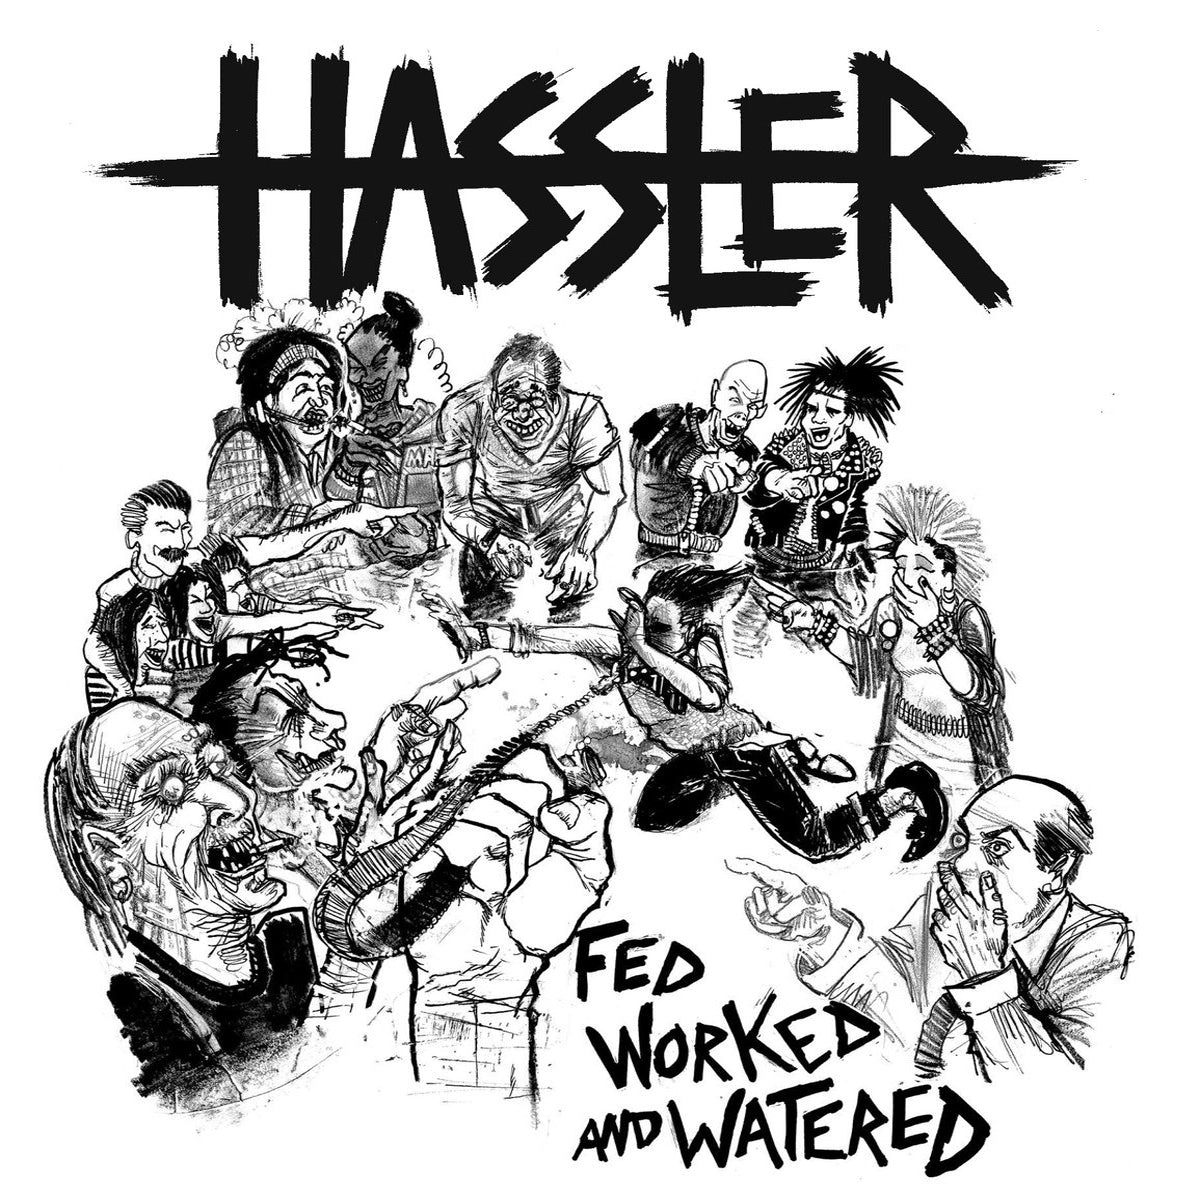 Hassler- Fed Worked And Watered LP ~EX TOXIC HOLOCAUST / CAREER SUICIDE!